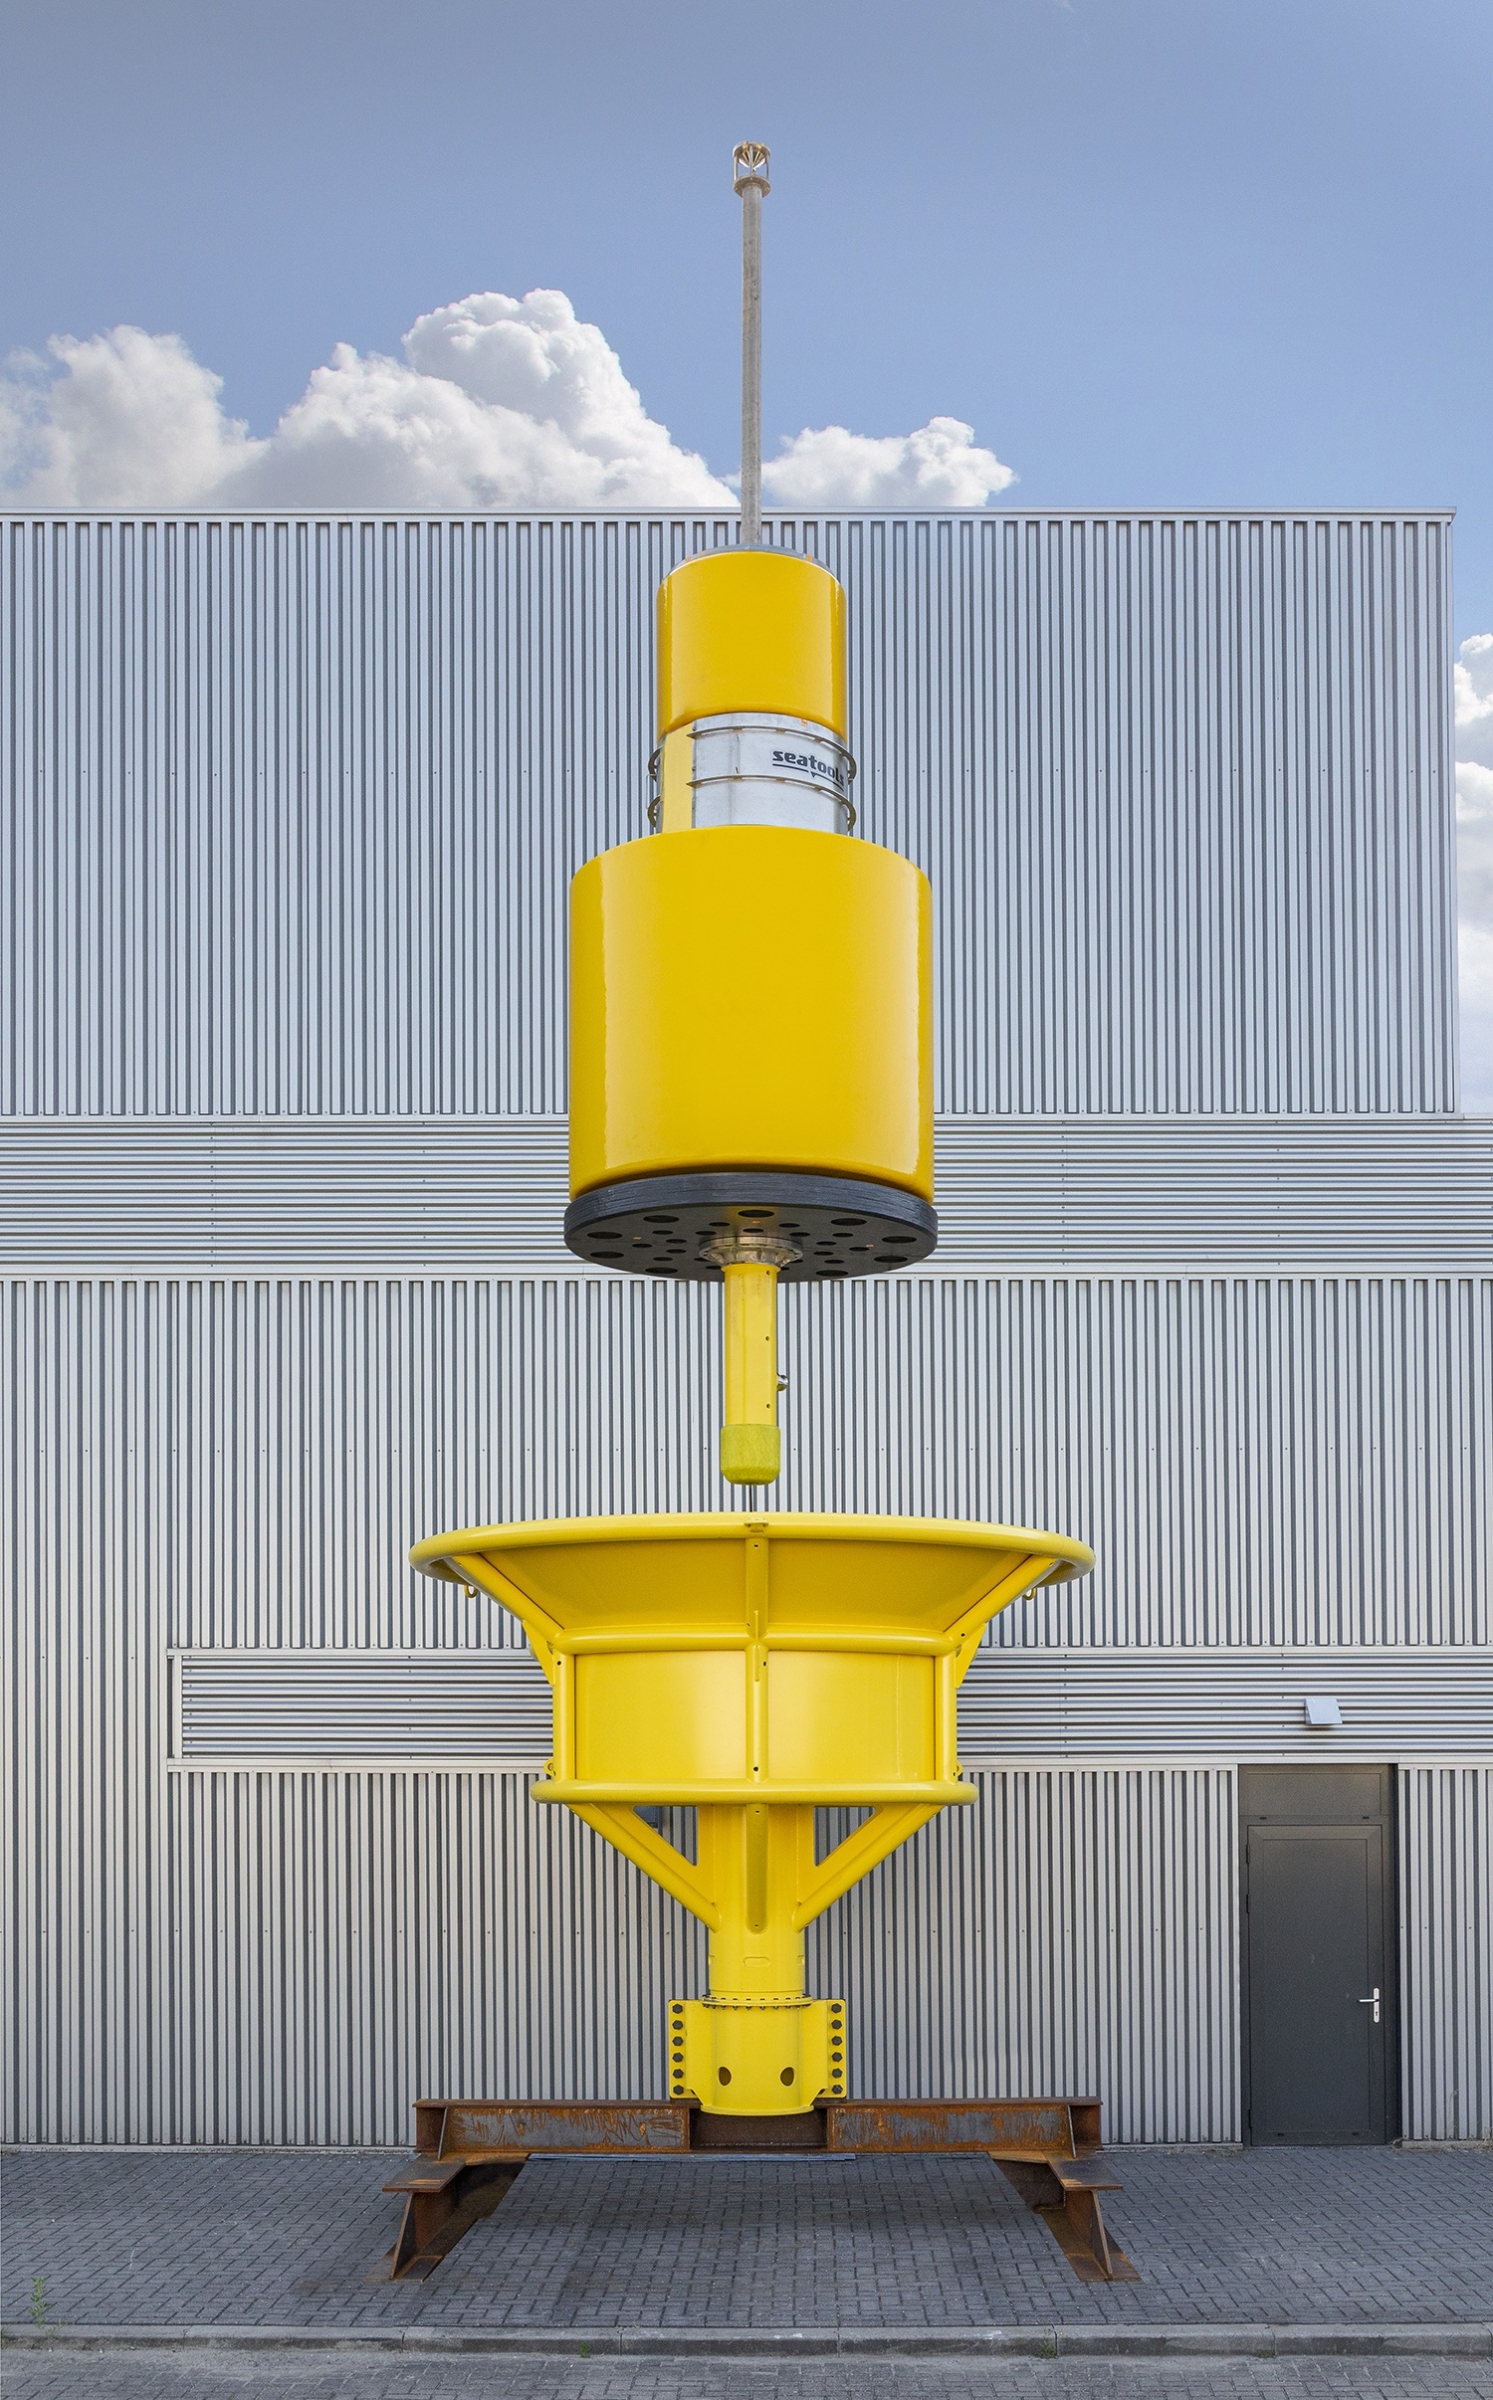 Seatools equips Boskalis with plough position monitoring buoy